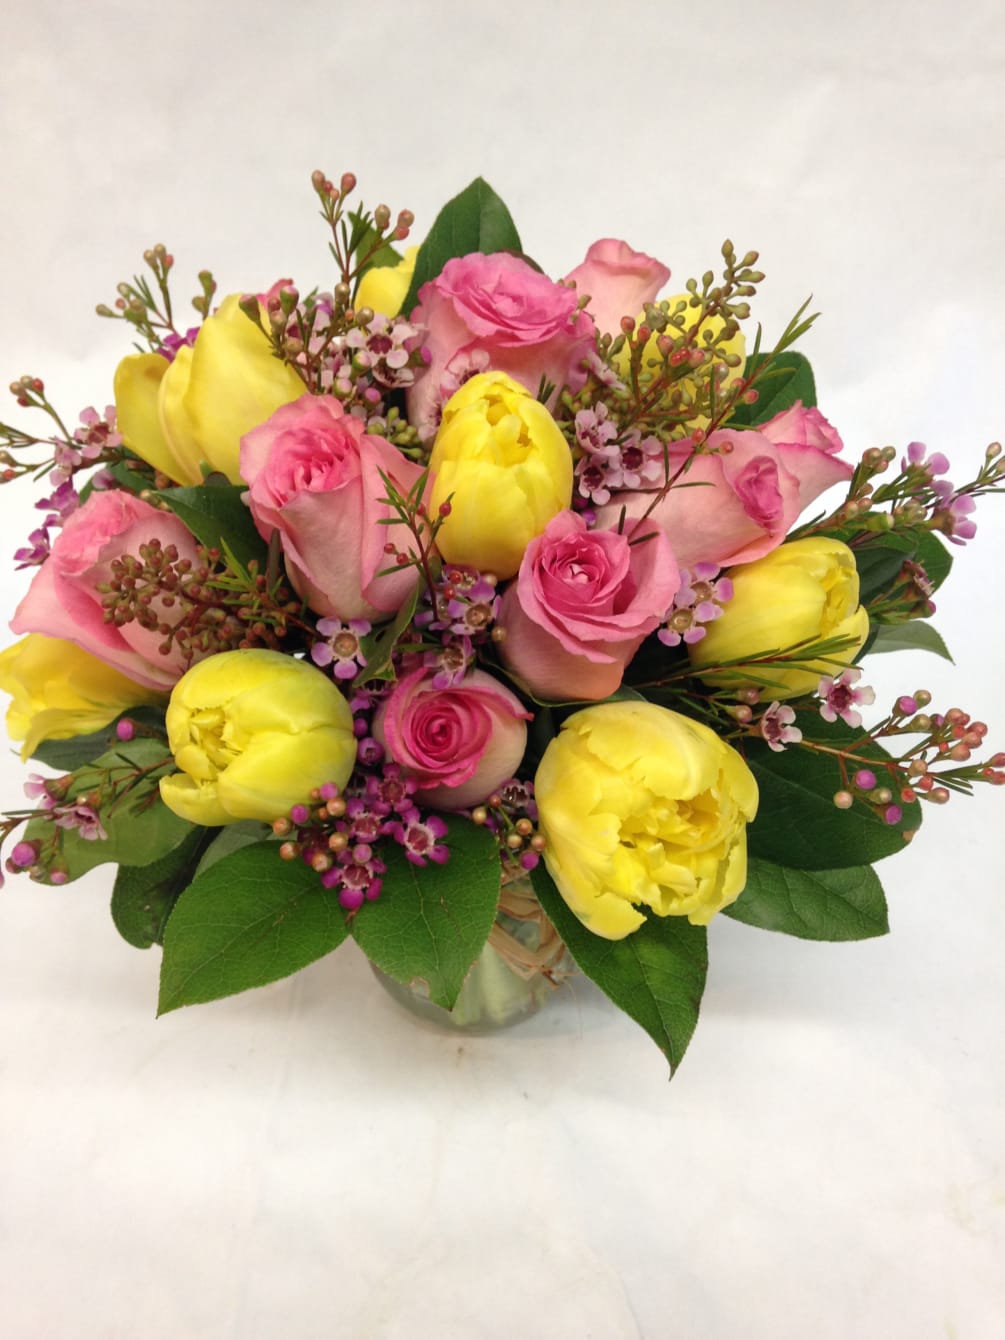 A sweet, spring jar of roses, tulips, and filler - for any